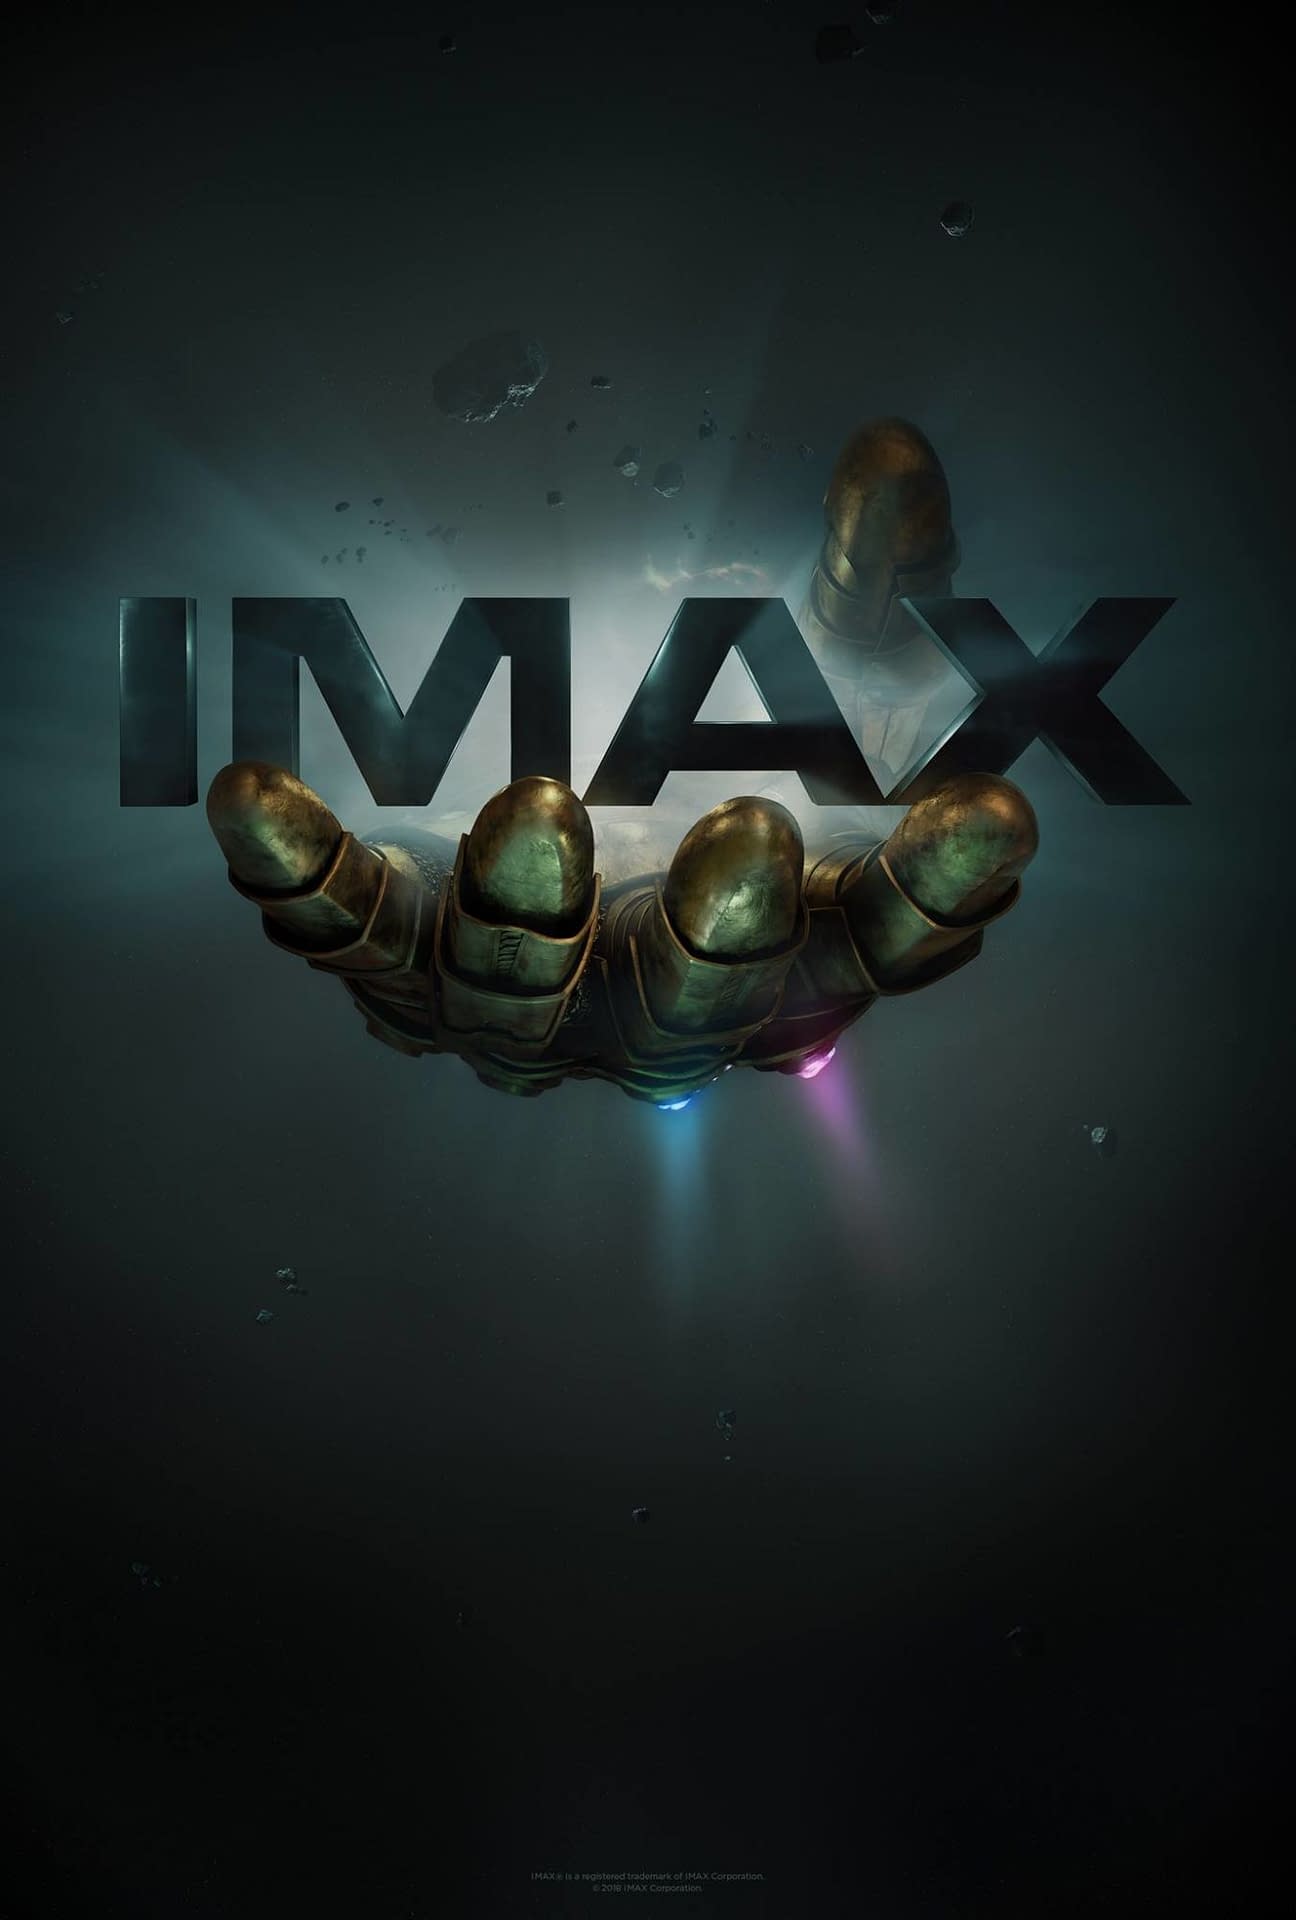 IMAX Releases a Banner, Poster, and Animation for Avengers: Infinity War